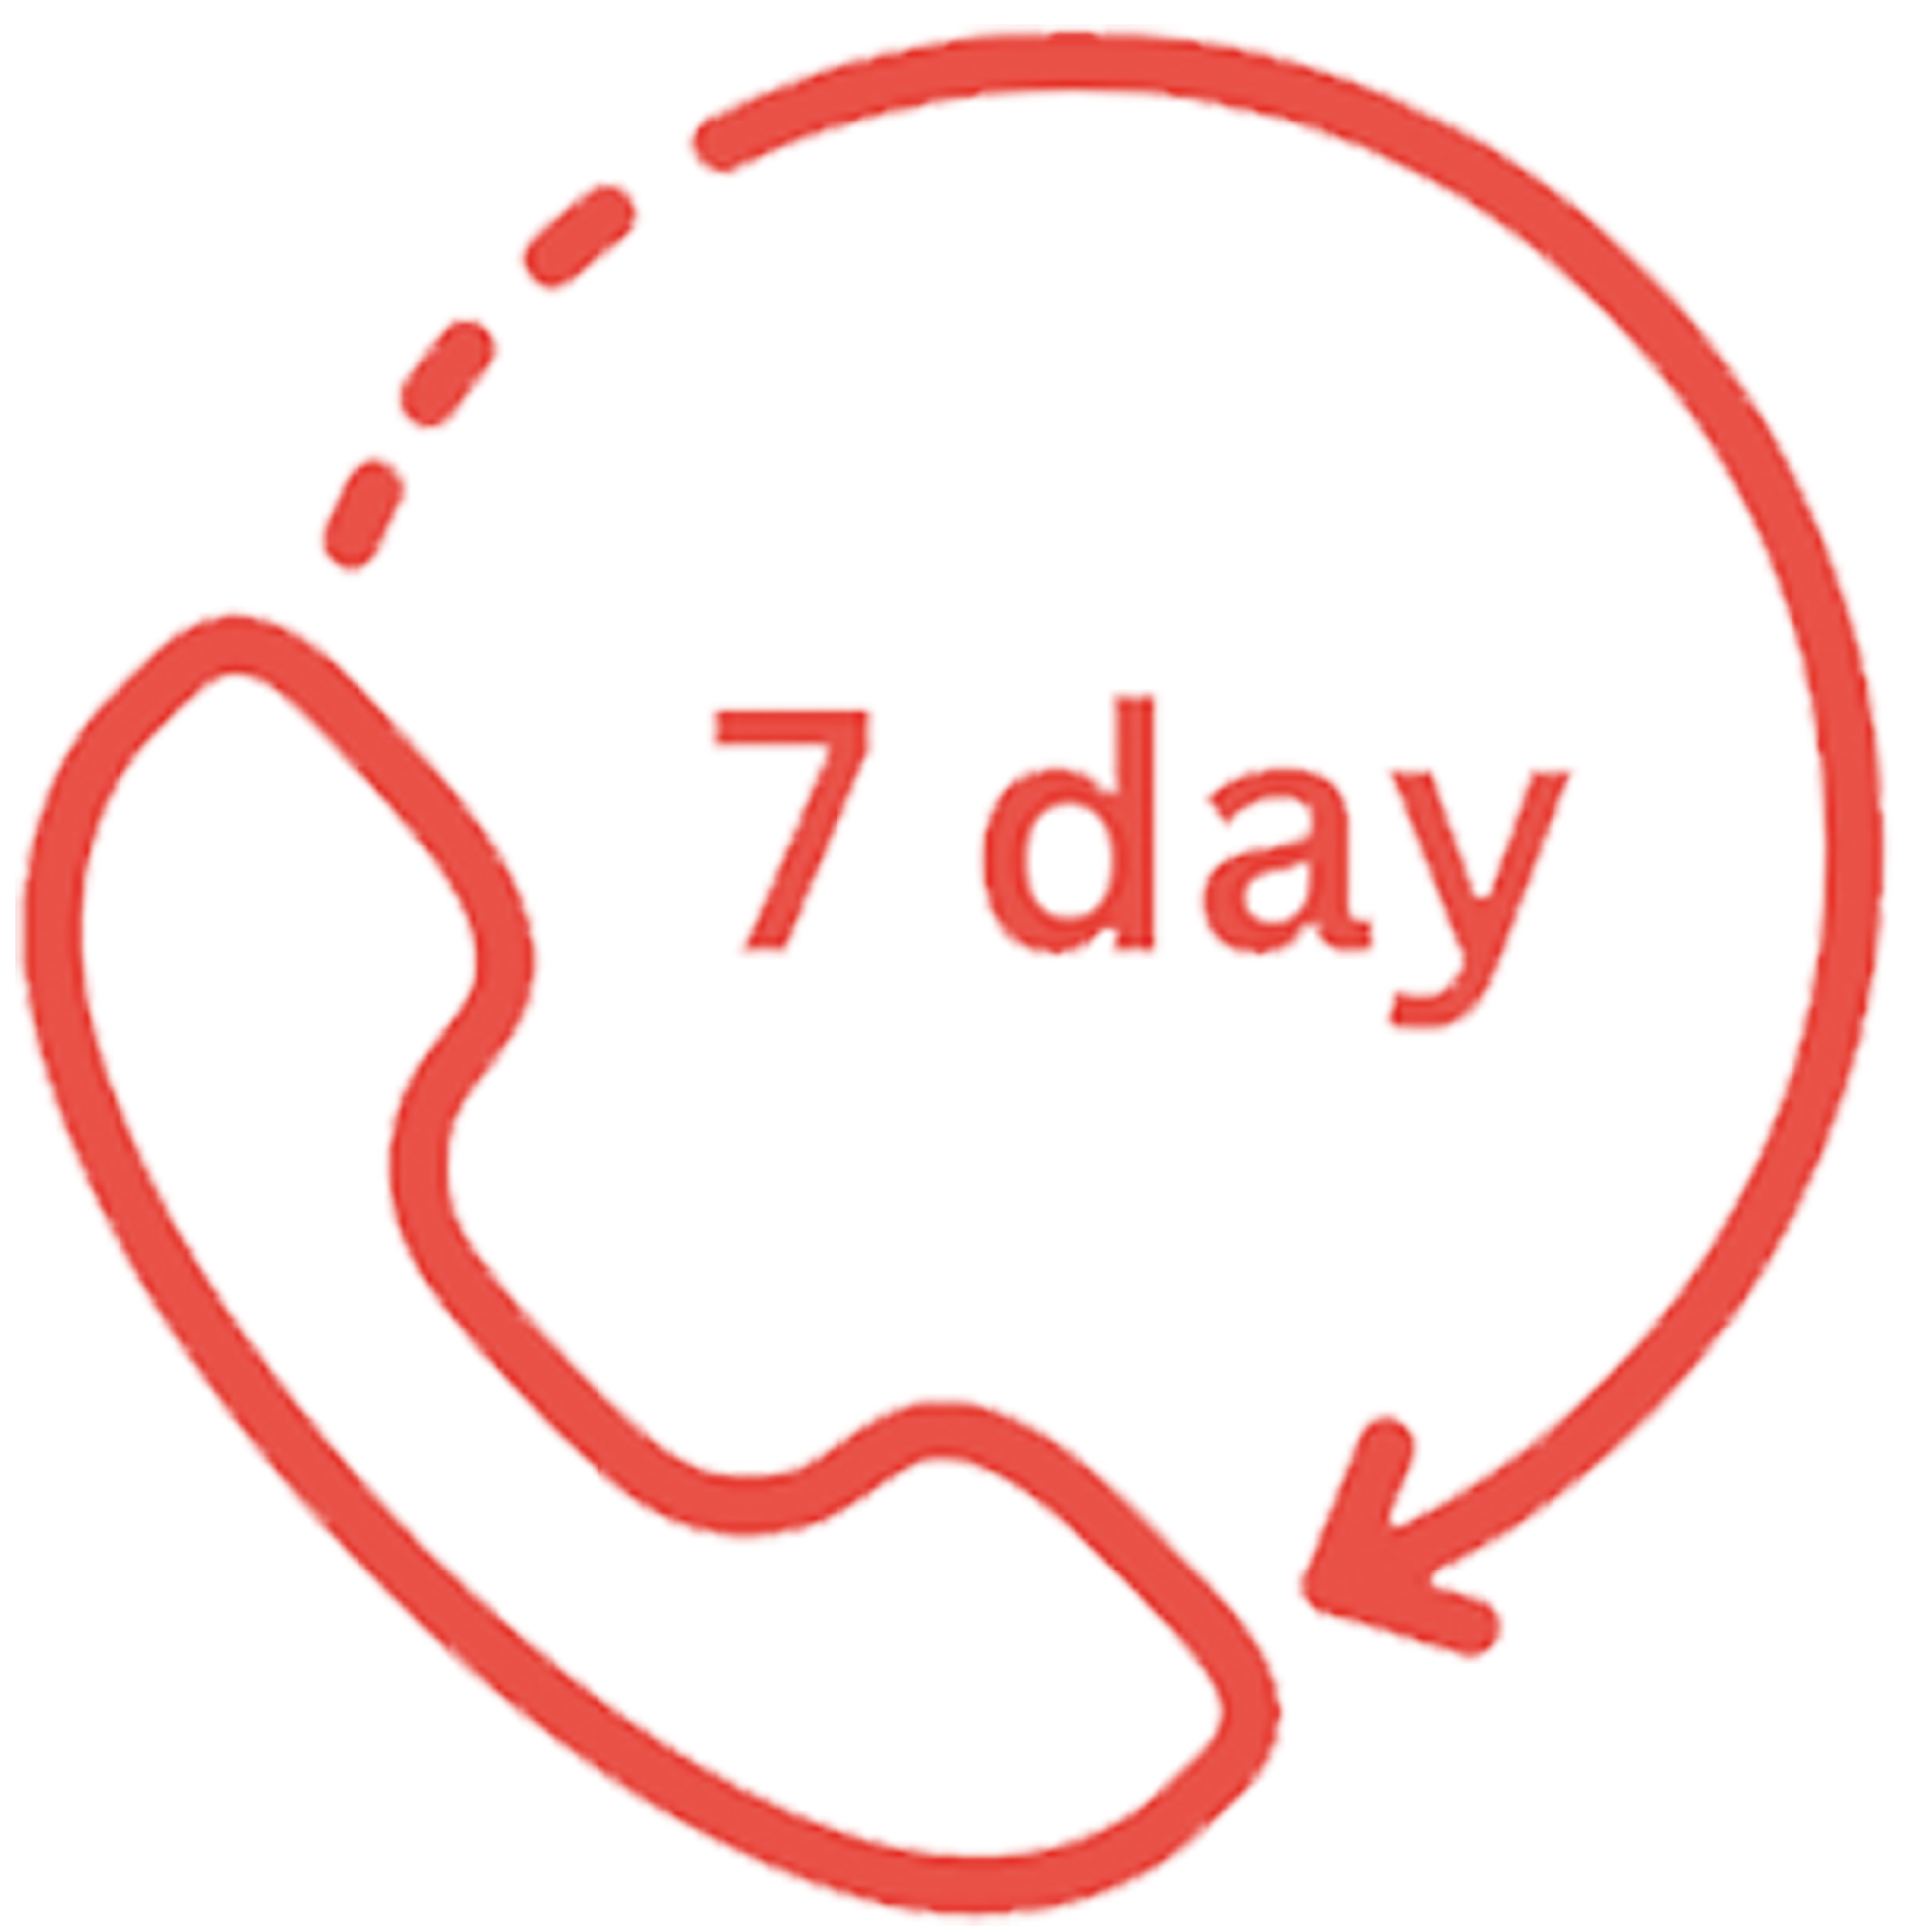 7 day service support icon.png